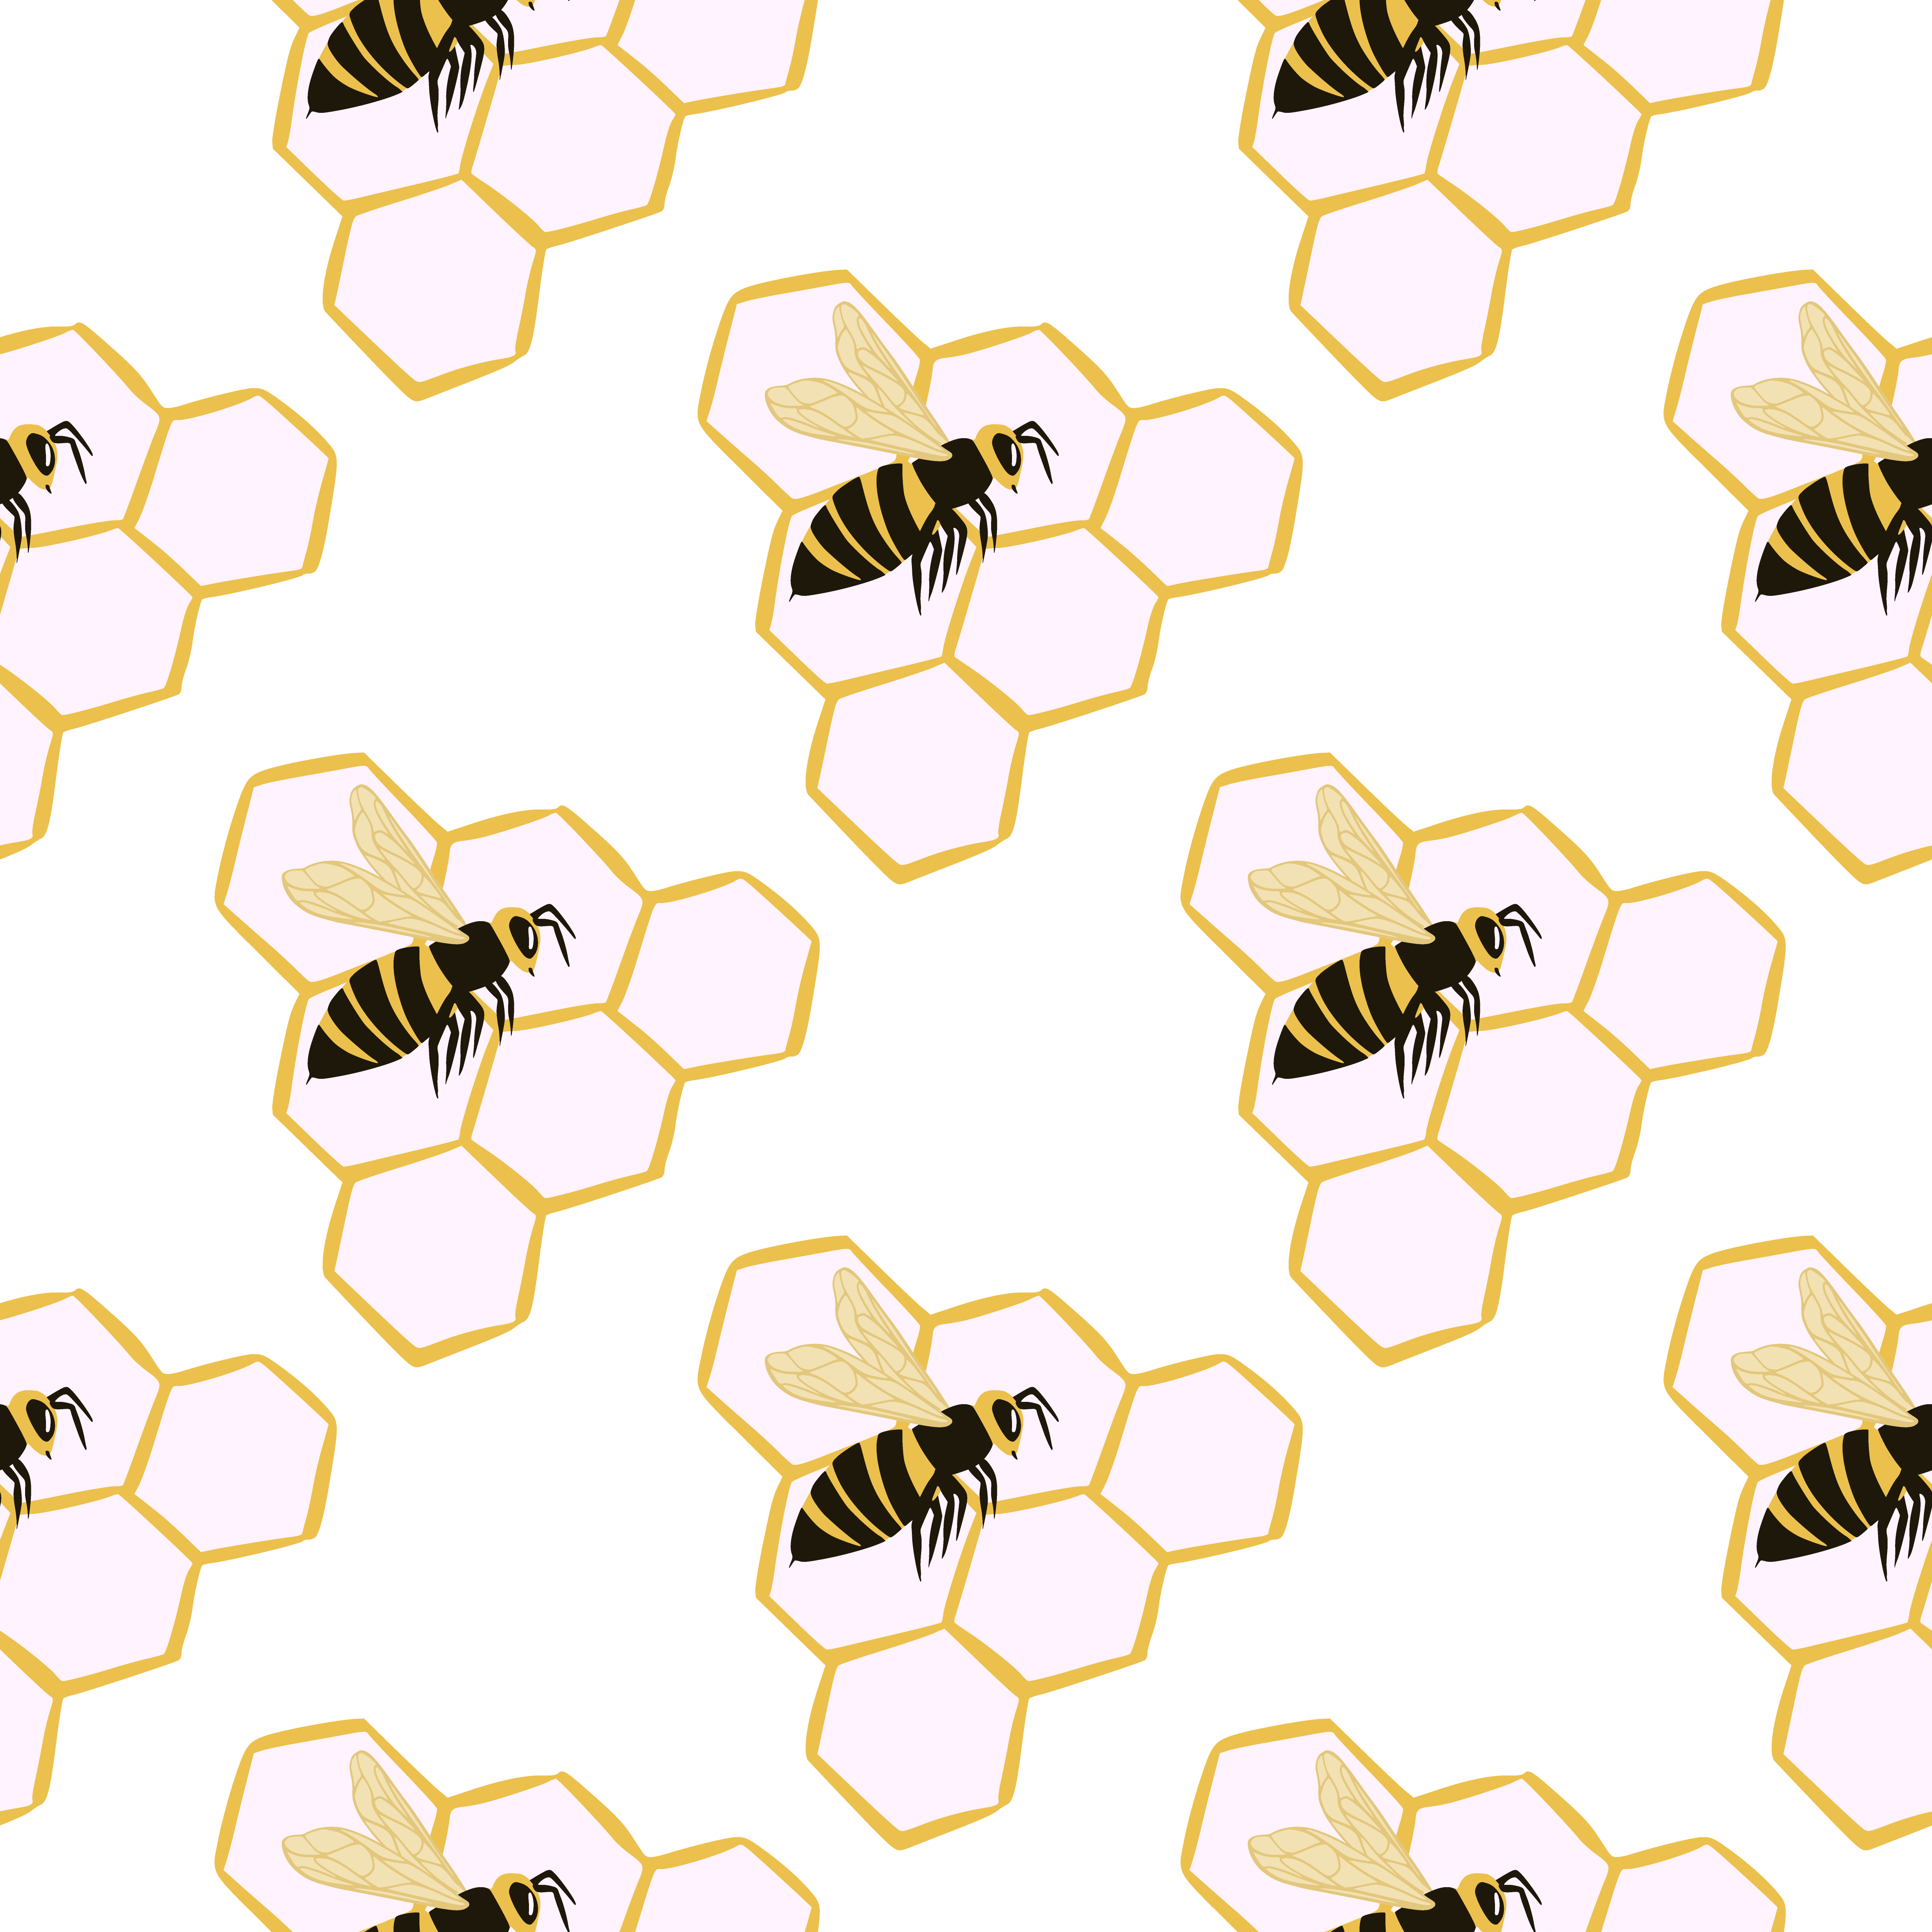 Minimalistic isolated seamless pattern with bees and honeycomb shapes. White background with yellow and black colores ornament. For wallpaper, textile, wrapping, fabric print. Vector illustration.. Minimalistic isolated seamless pattern with bees and honeycomb shapes. White background with yellow and black colores ornament.